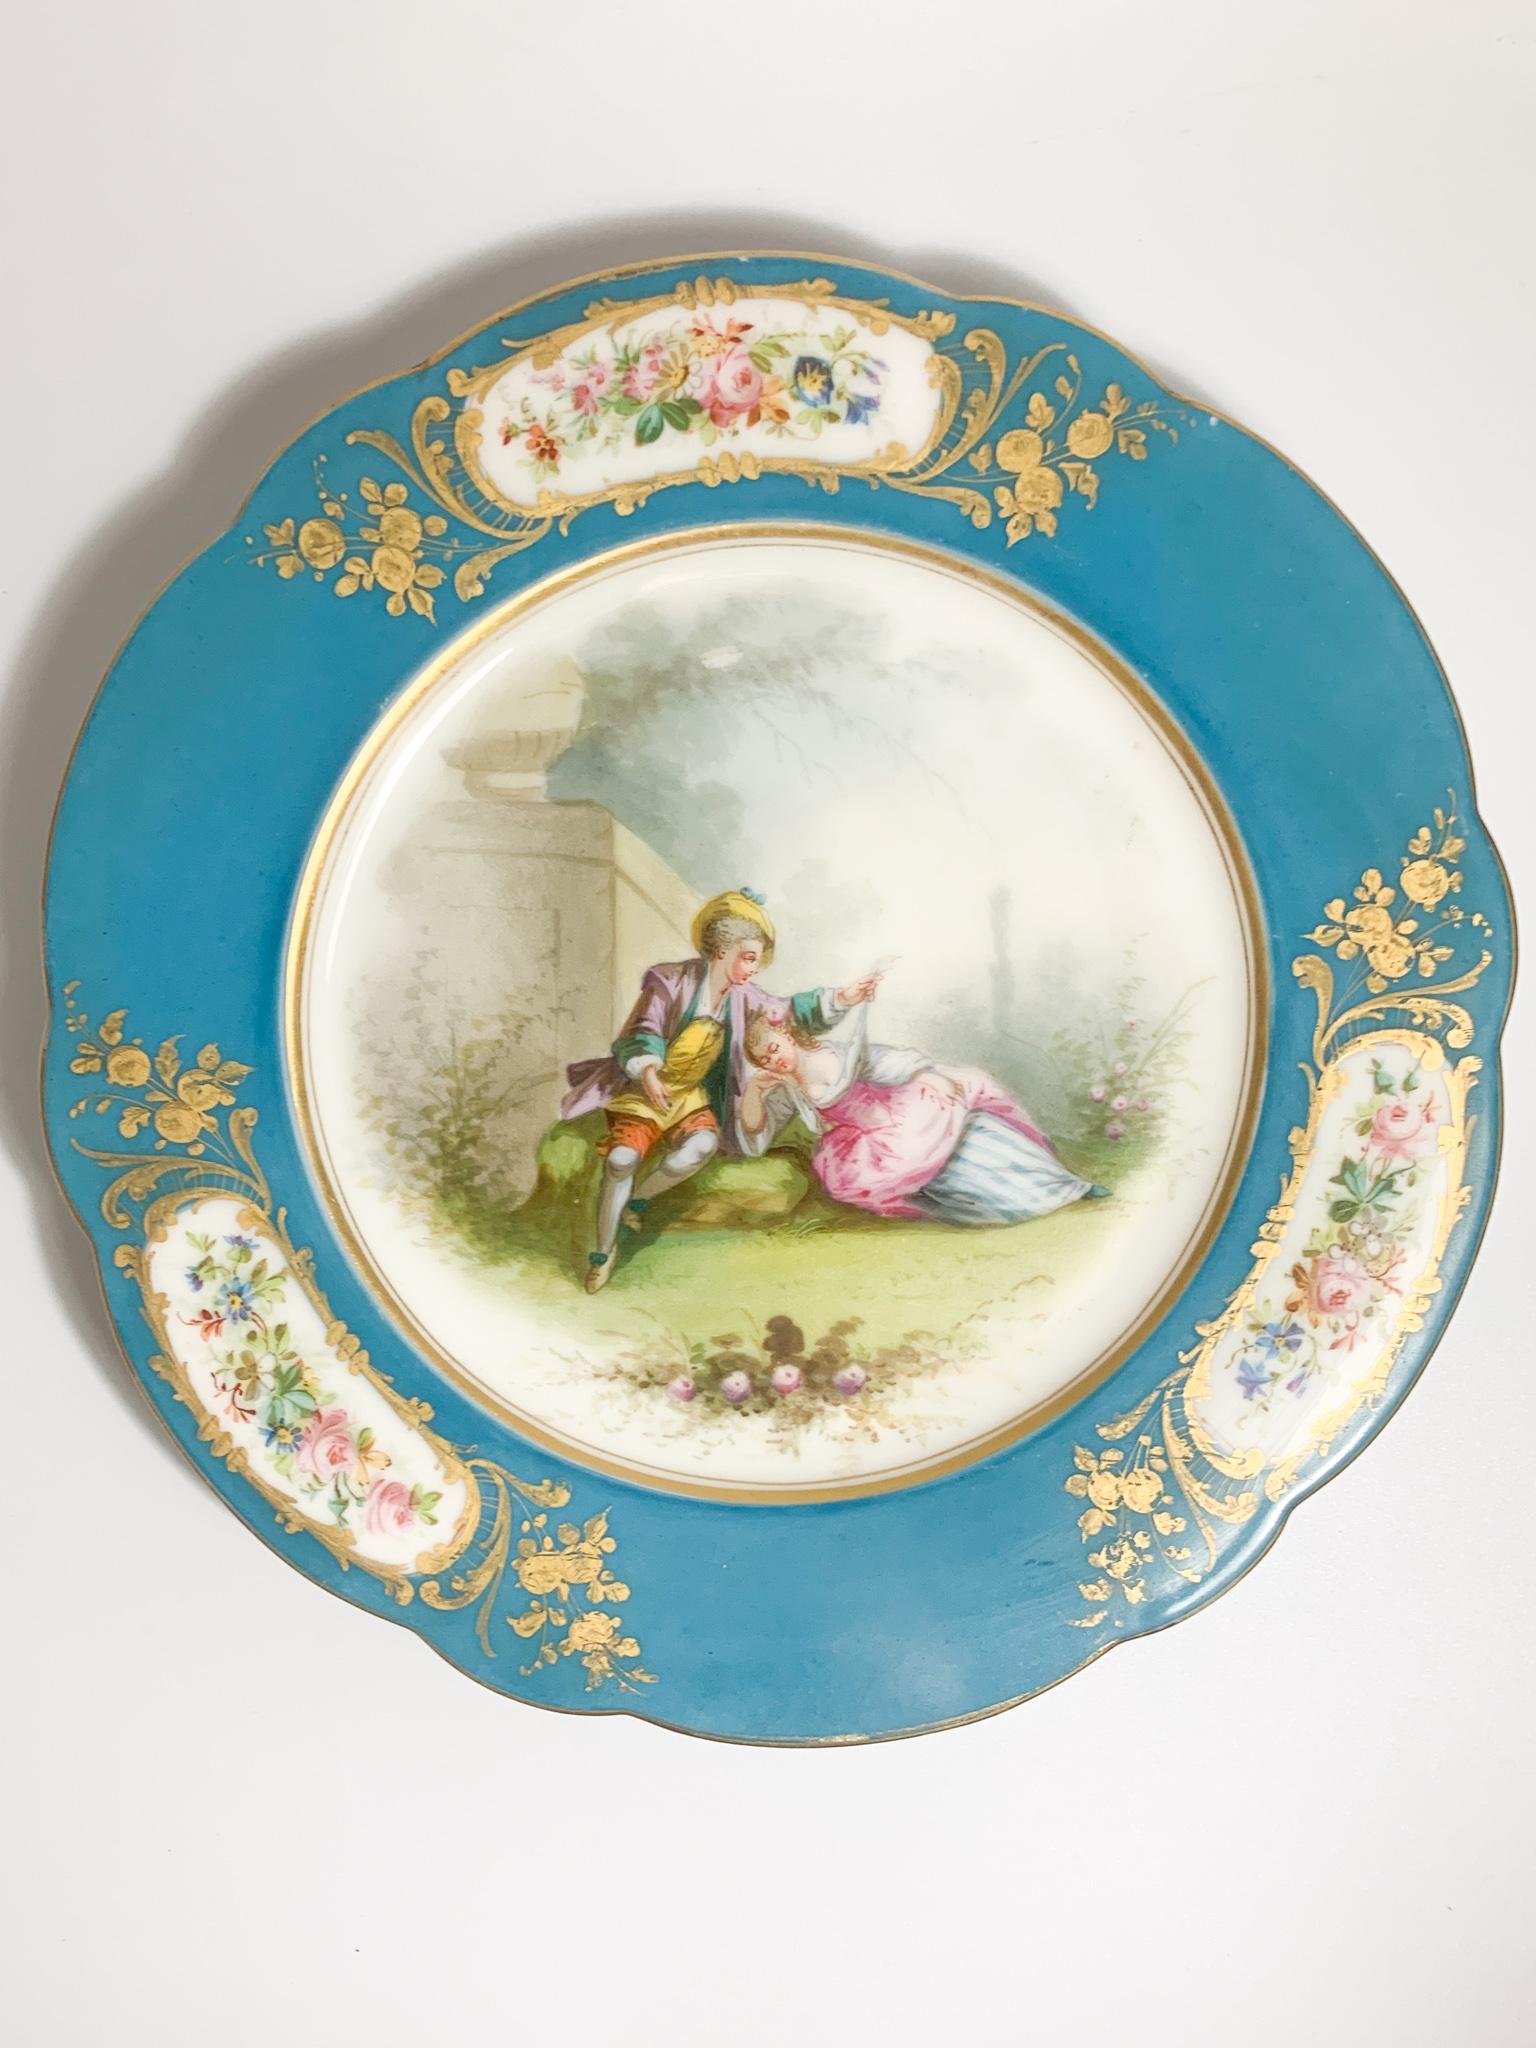 Sevres porcelain plate, hand painted and depicting a scene of lovers, made in the 19th century.

Ø cm 22.5

Sèvres pottery is one of the most famous ceramic manufacturers in all of Europe, born in France in the 18th century. From the beginning, the